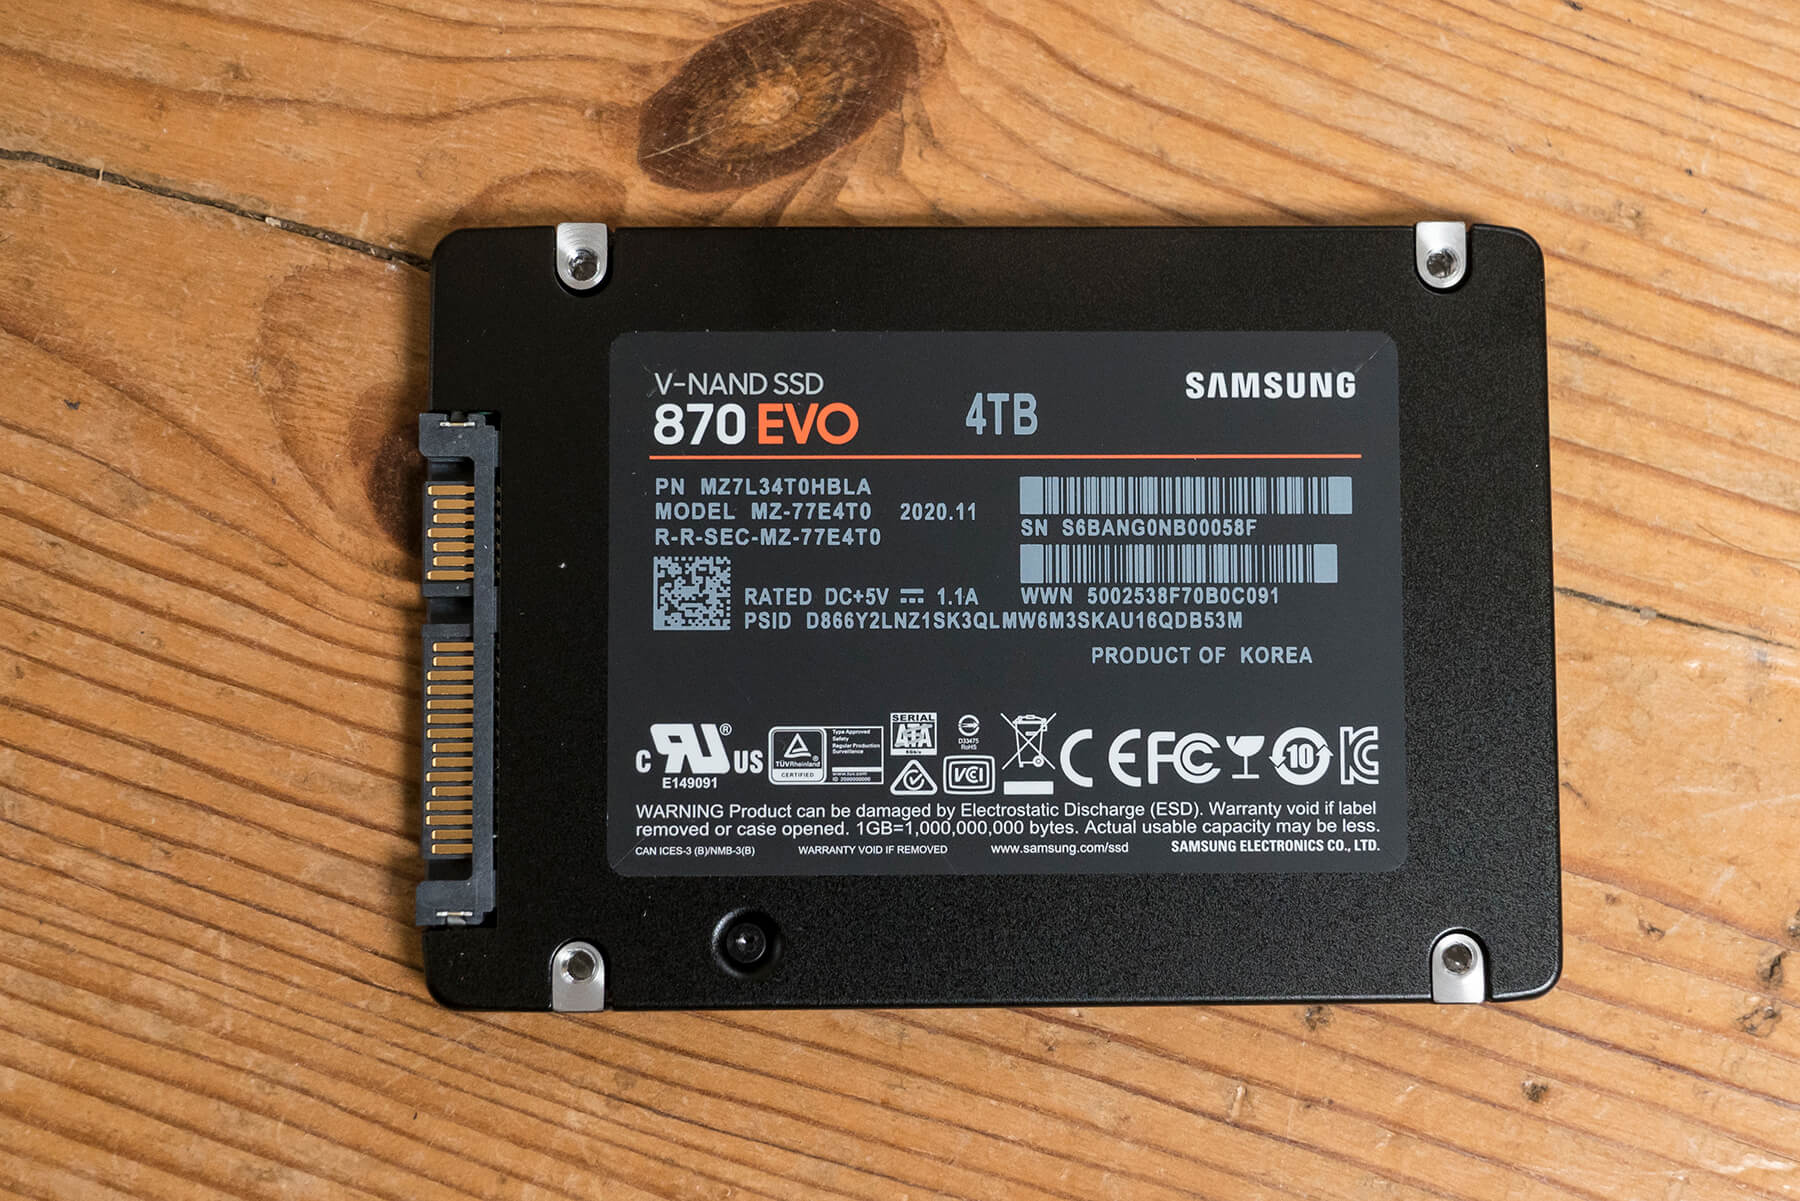 Hands-on with the Samsung 870 EVO SSD - Pro Moviemaker